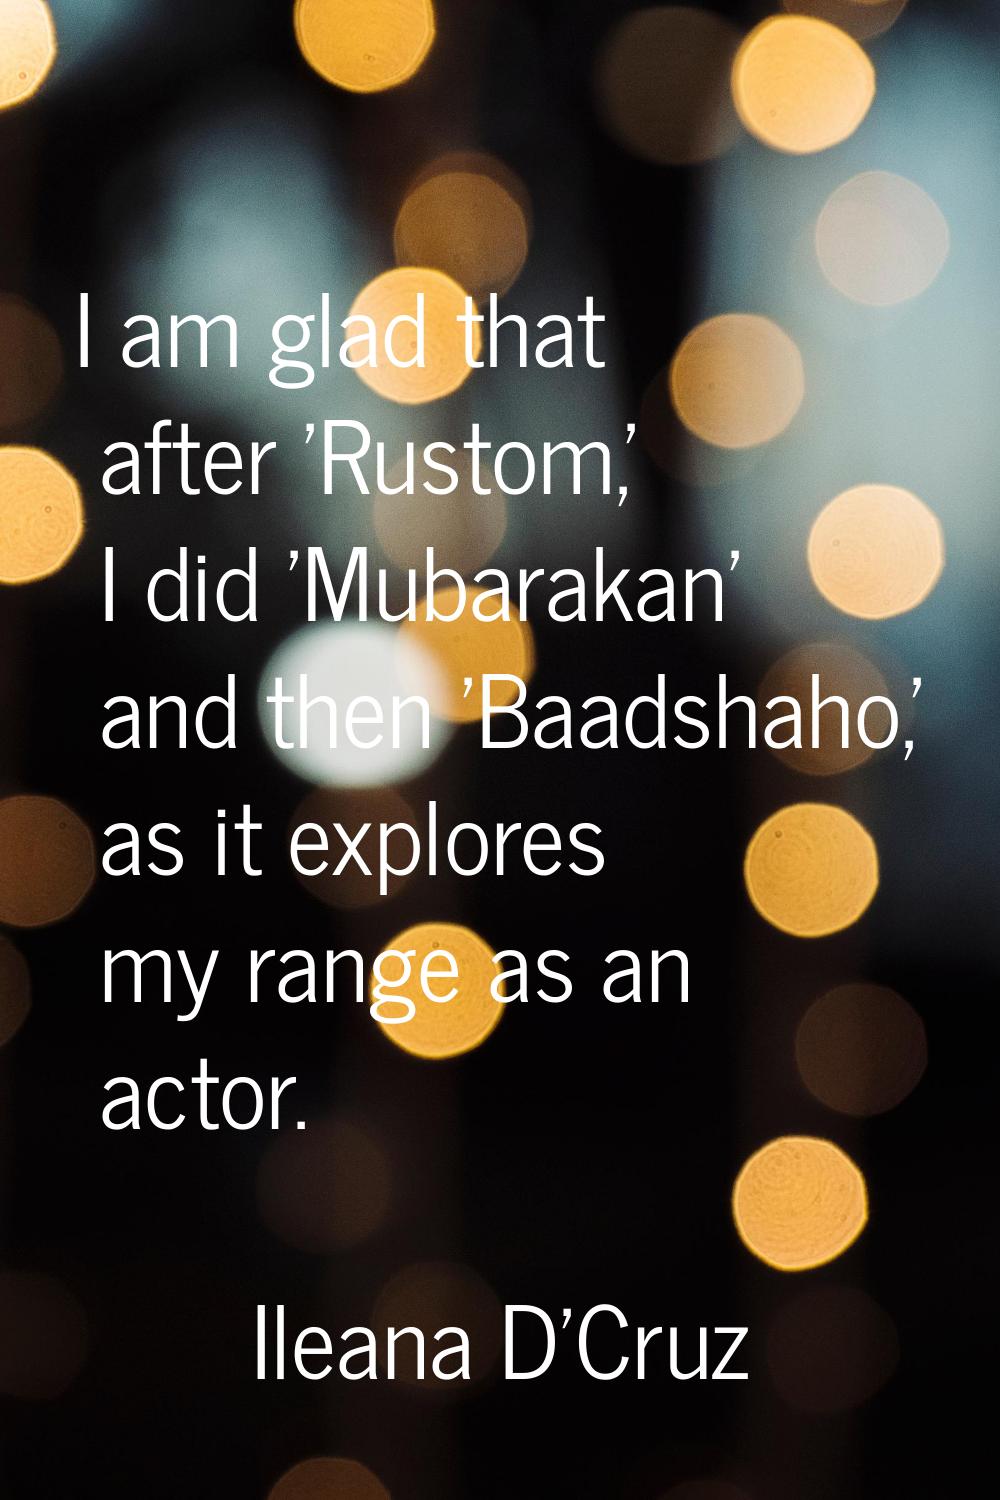 I am glad that after 'Rustom,' I did 'Mubarakan' and then 'Baadshaho,' as it explores my range as a